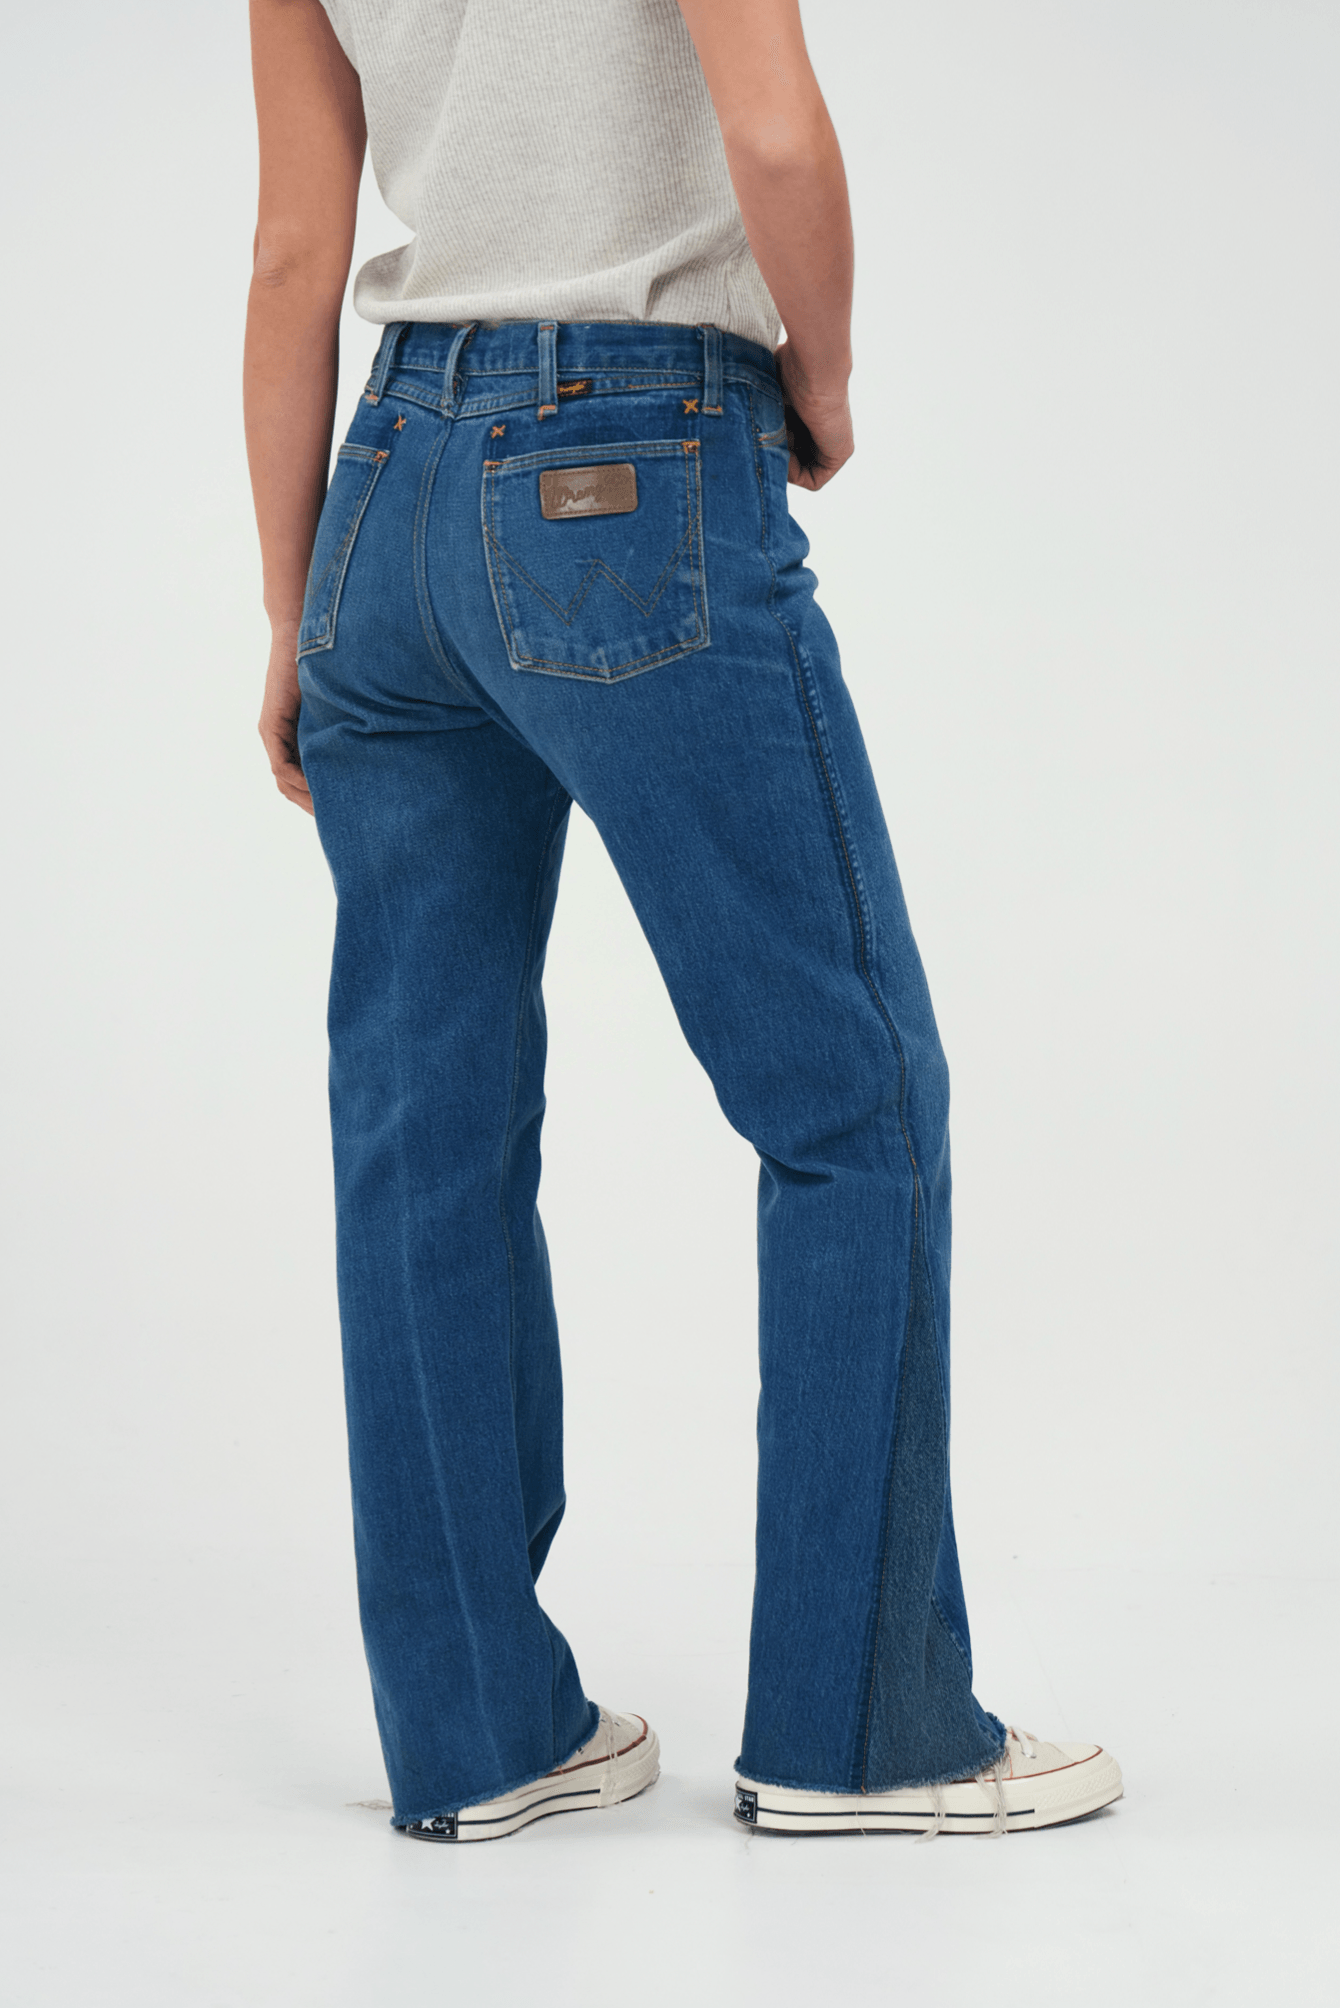 Wrangled Denim Bell Bottoms - youthebrave - Reviving forgotten textiles into timeless masterpieces. Our ethical practices and up-cycling philosophy drive positive change. Based in LA, we excel in designing, sourcing, and manufacturing domestic goods, crafting luxury utilitarian collections. Express your style sustainably with authentic, American-made fashion and support our commitment to locally-produced goods.